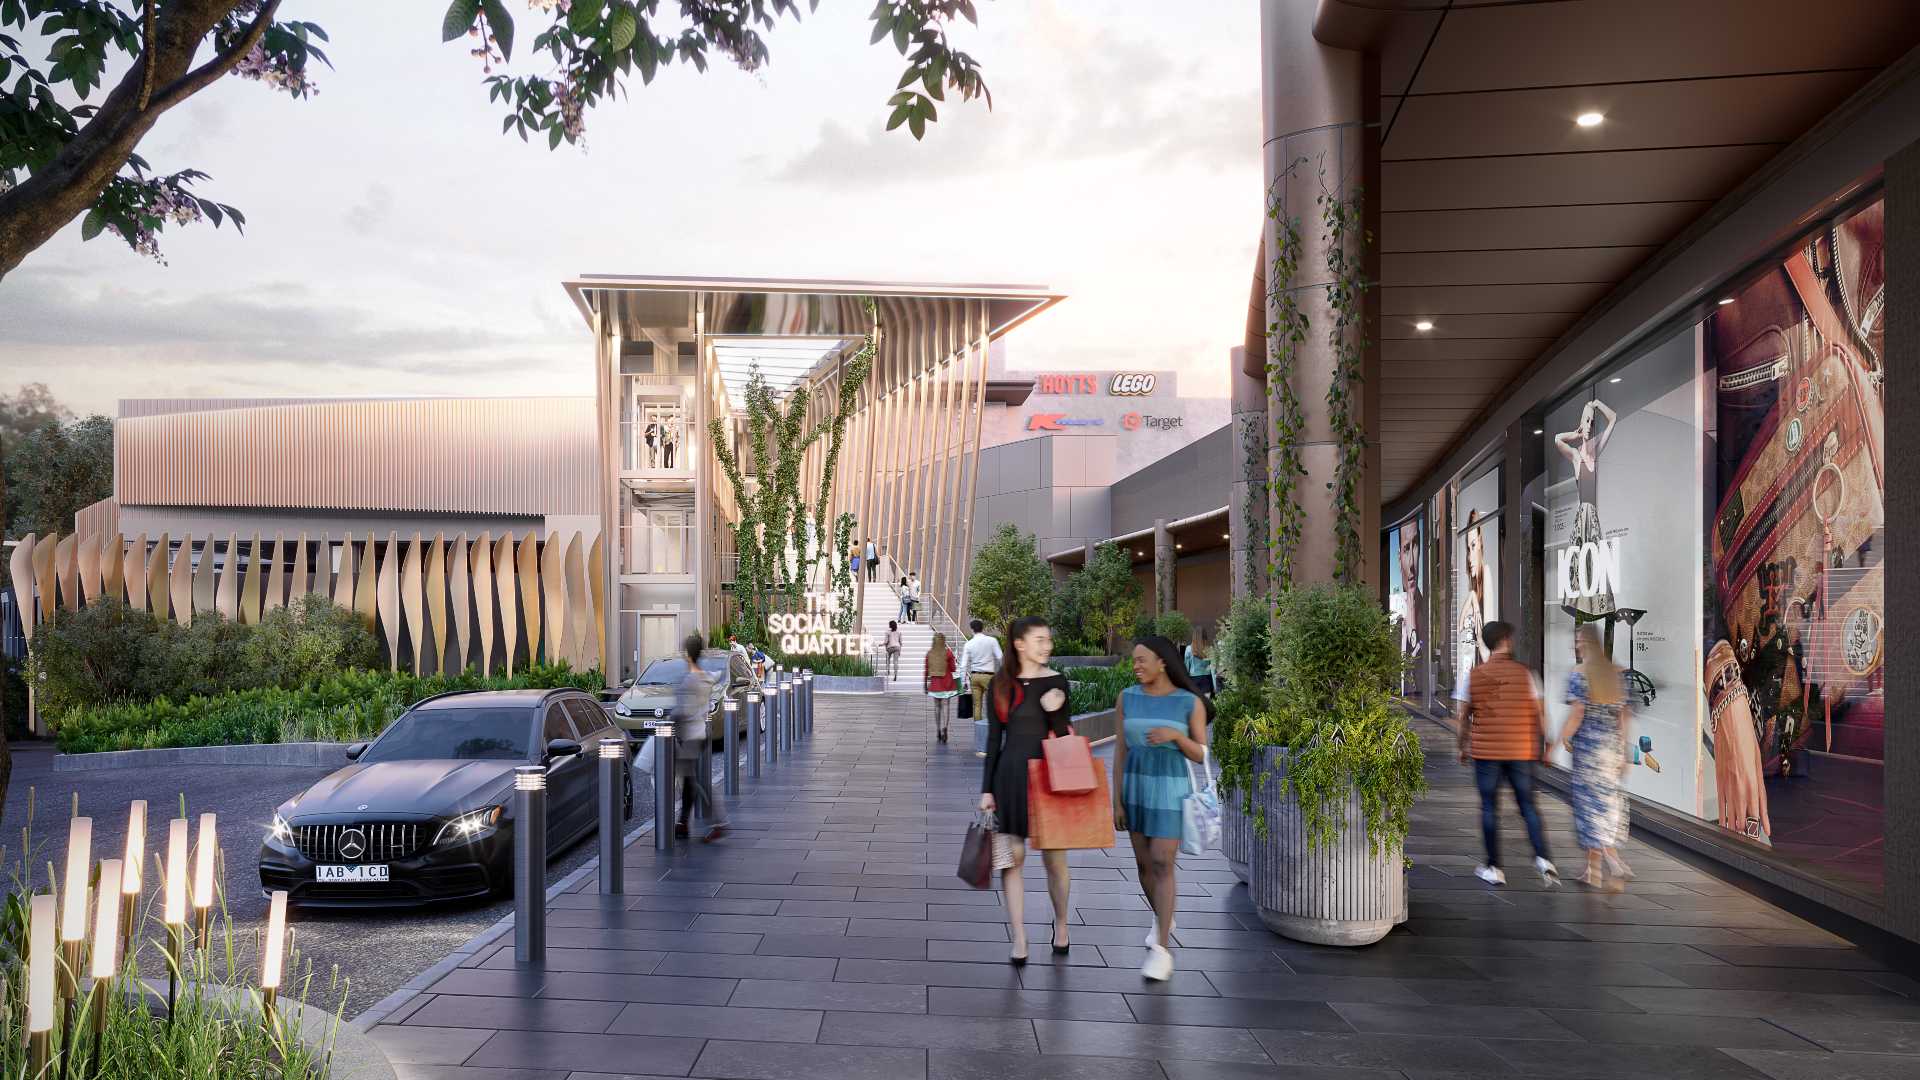 Chadstone Is Launching a New $71 Million Entertainment and Dining Precinct This Summer